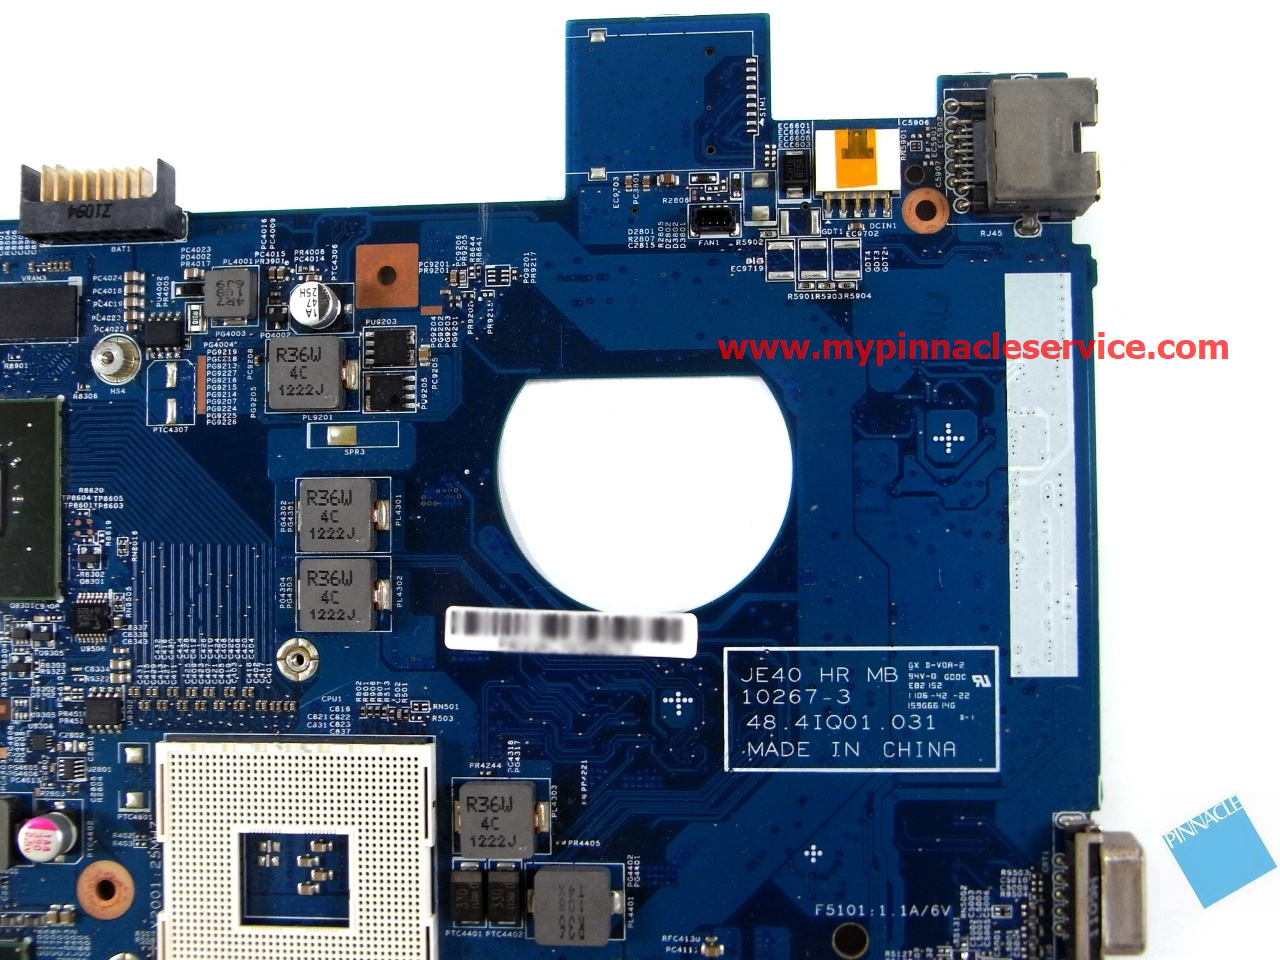 superbsail copy replacement motherboard controller for